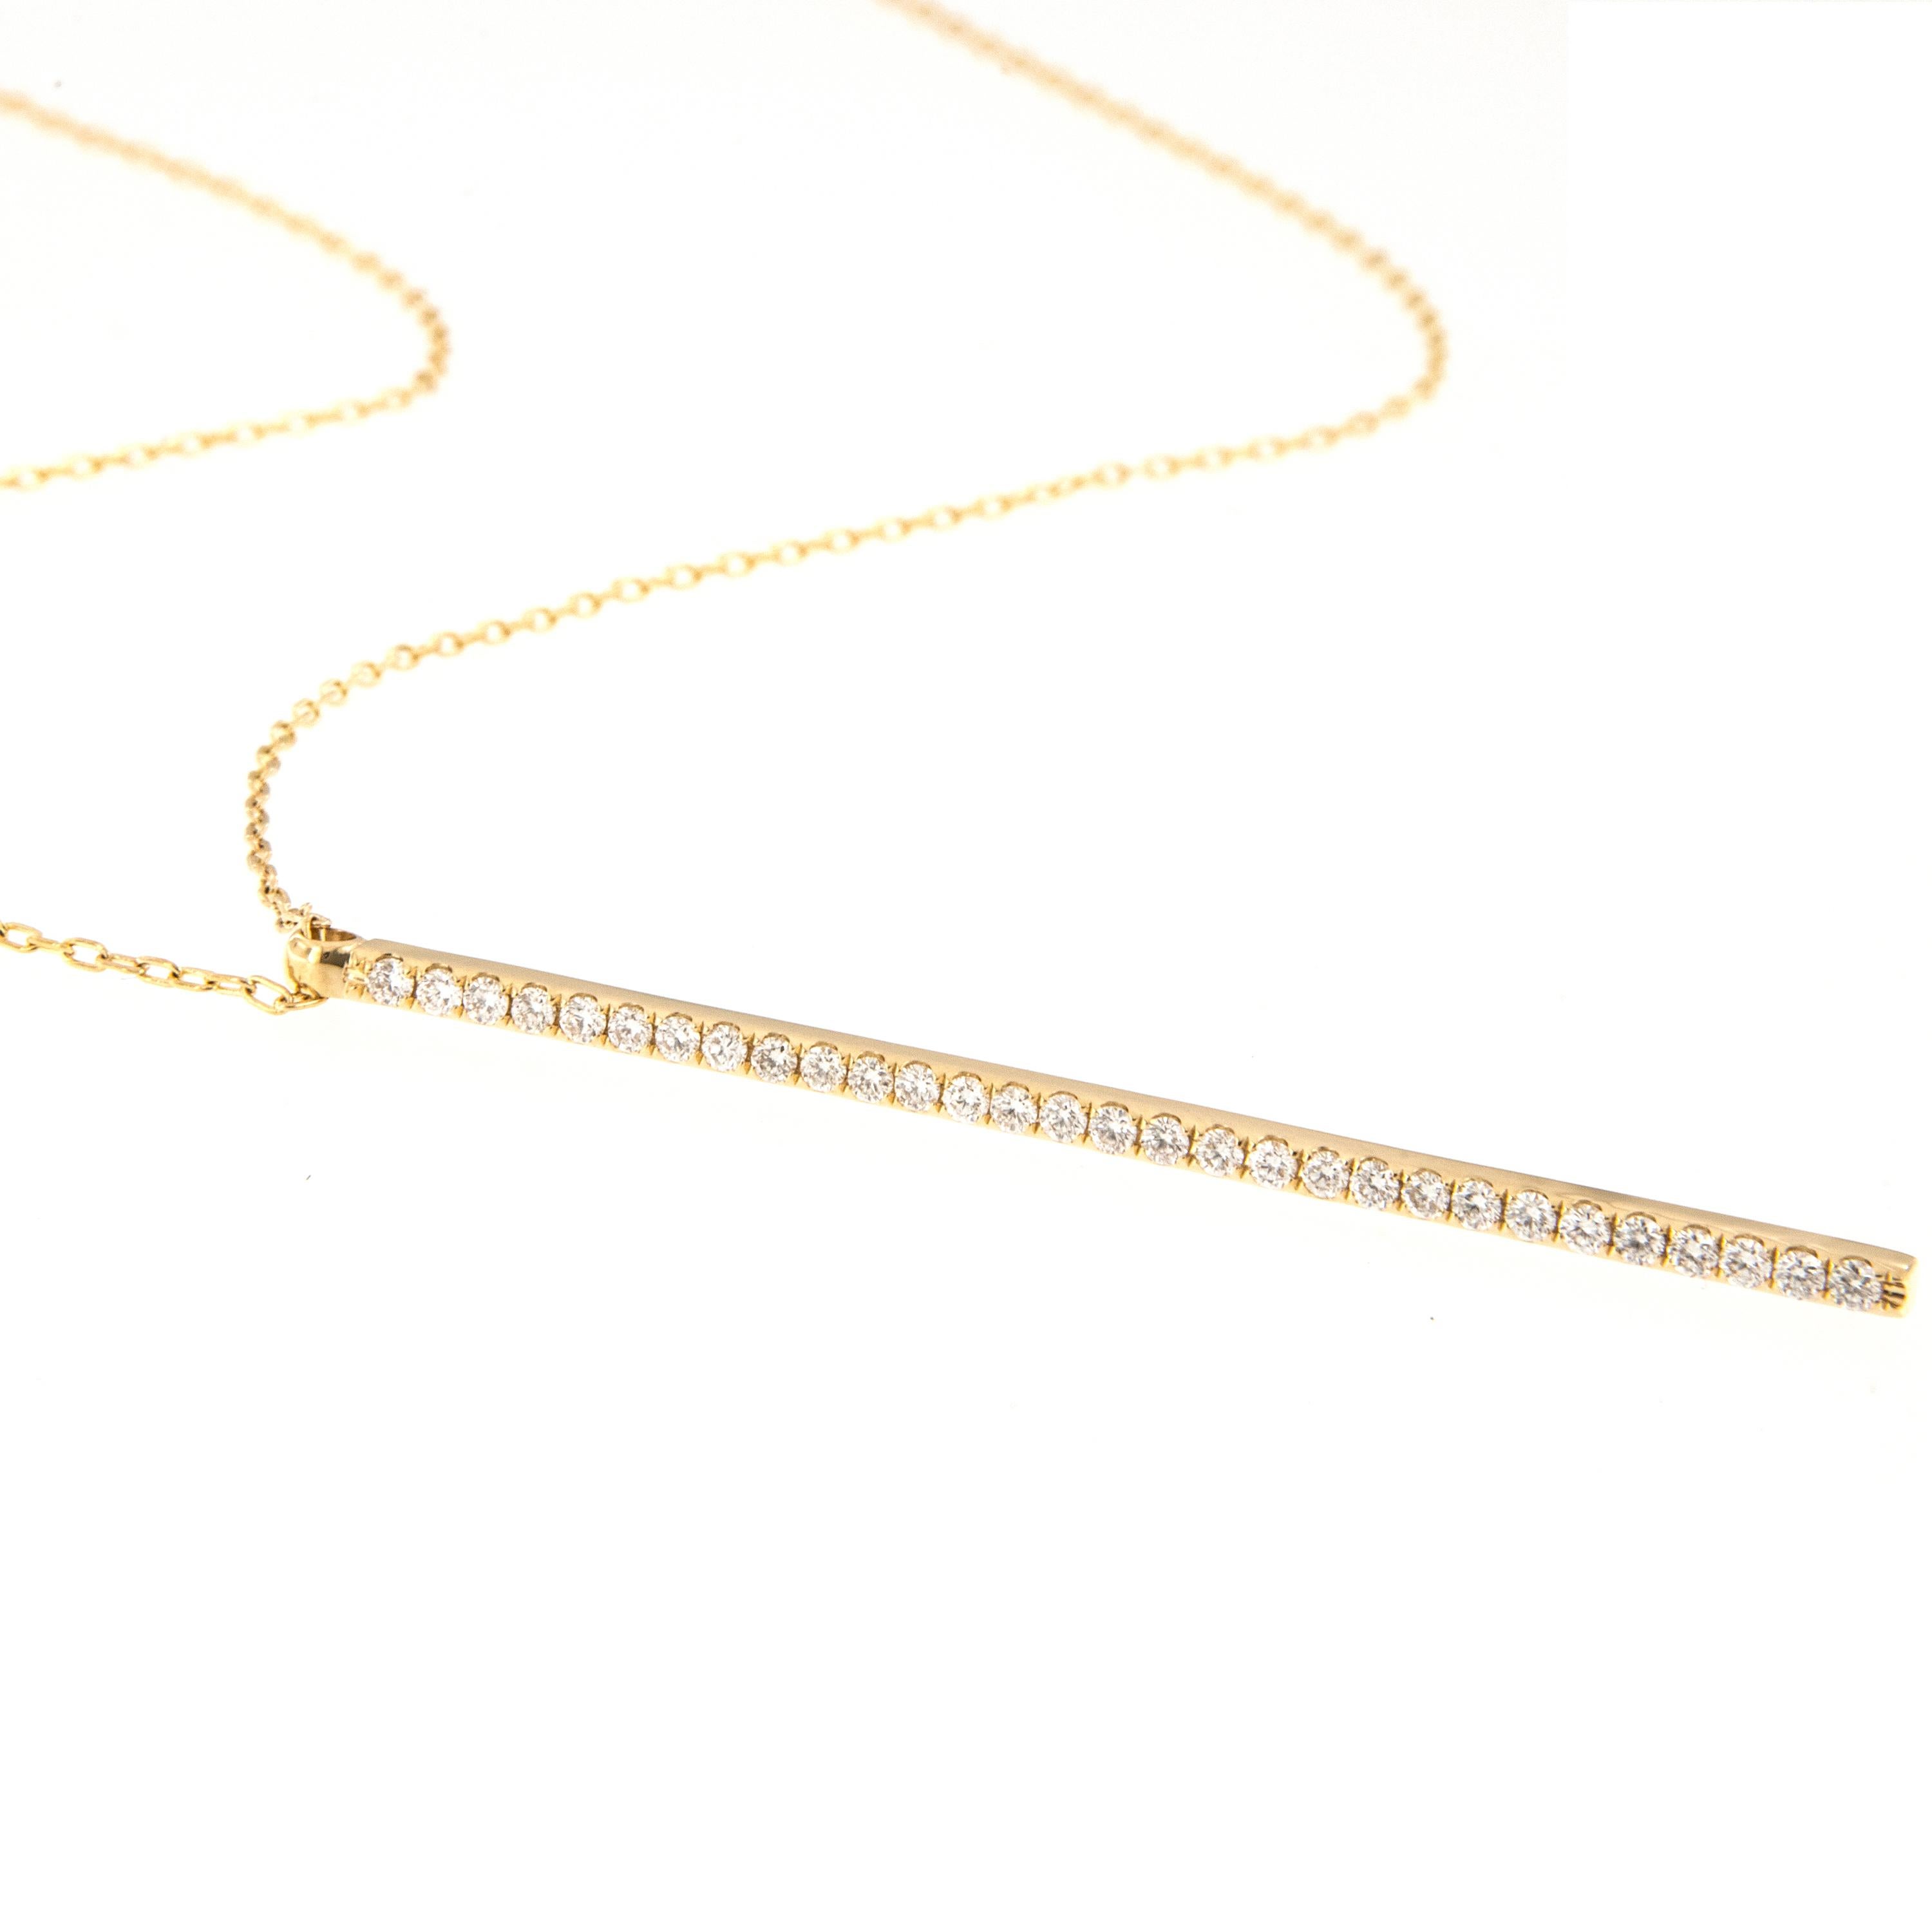 Crafted in rich 18 karat yellow gold, this fashion forward diamond drop necklace is sure to please! With 0.60 Cttw of fine VS diamonds shimmering in the 57mm long bar on an 18